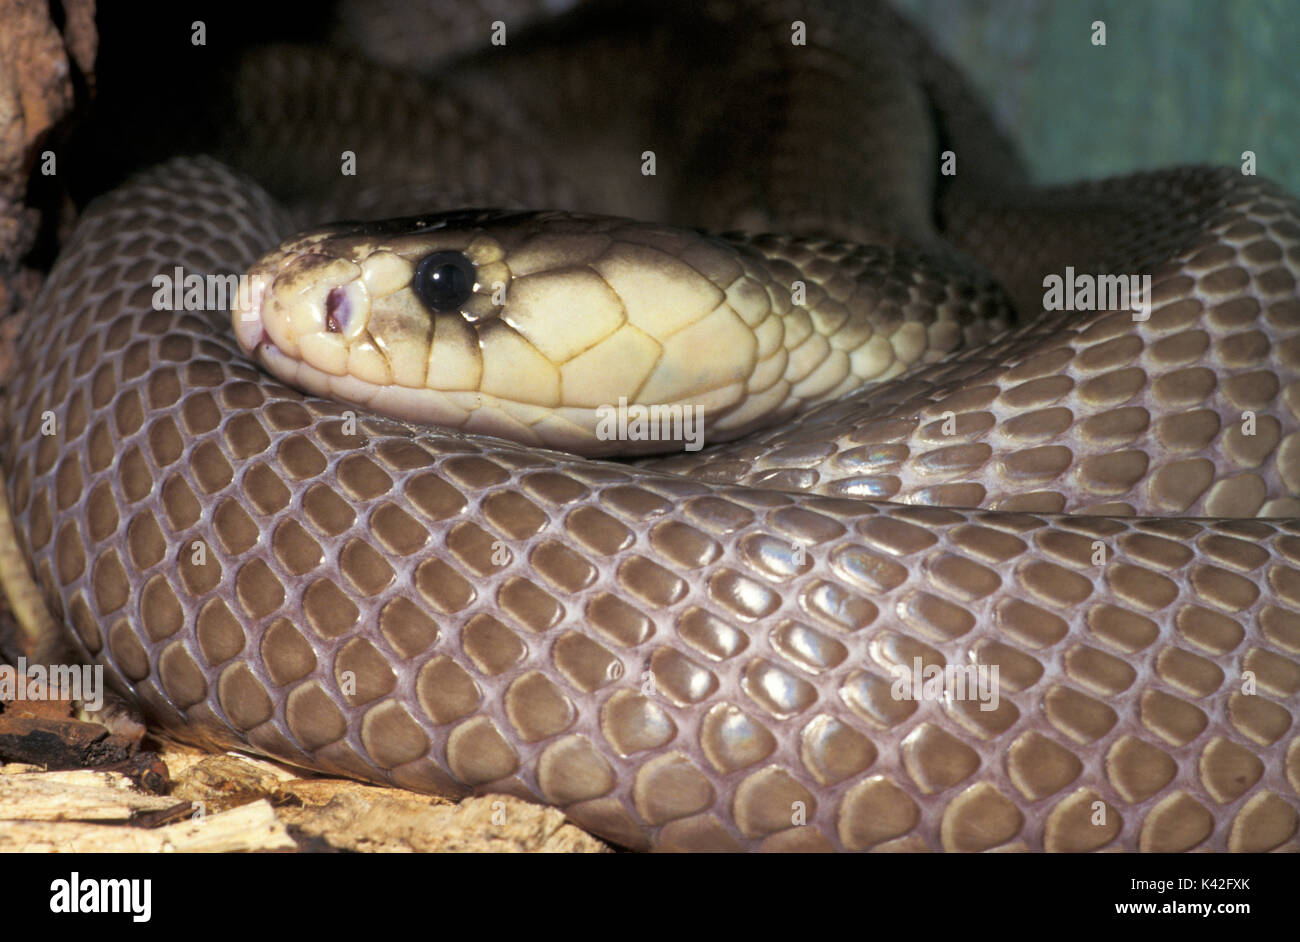 Indian Cobra Snake, Naja naja, India, Asian cobra or spectacled cobra is a species of the genus Naja found in the Indian subcontinent, venemous captiv Stock Photo